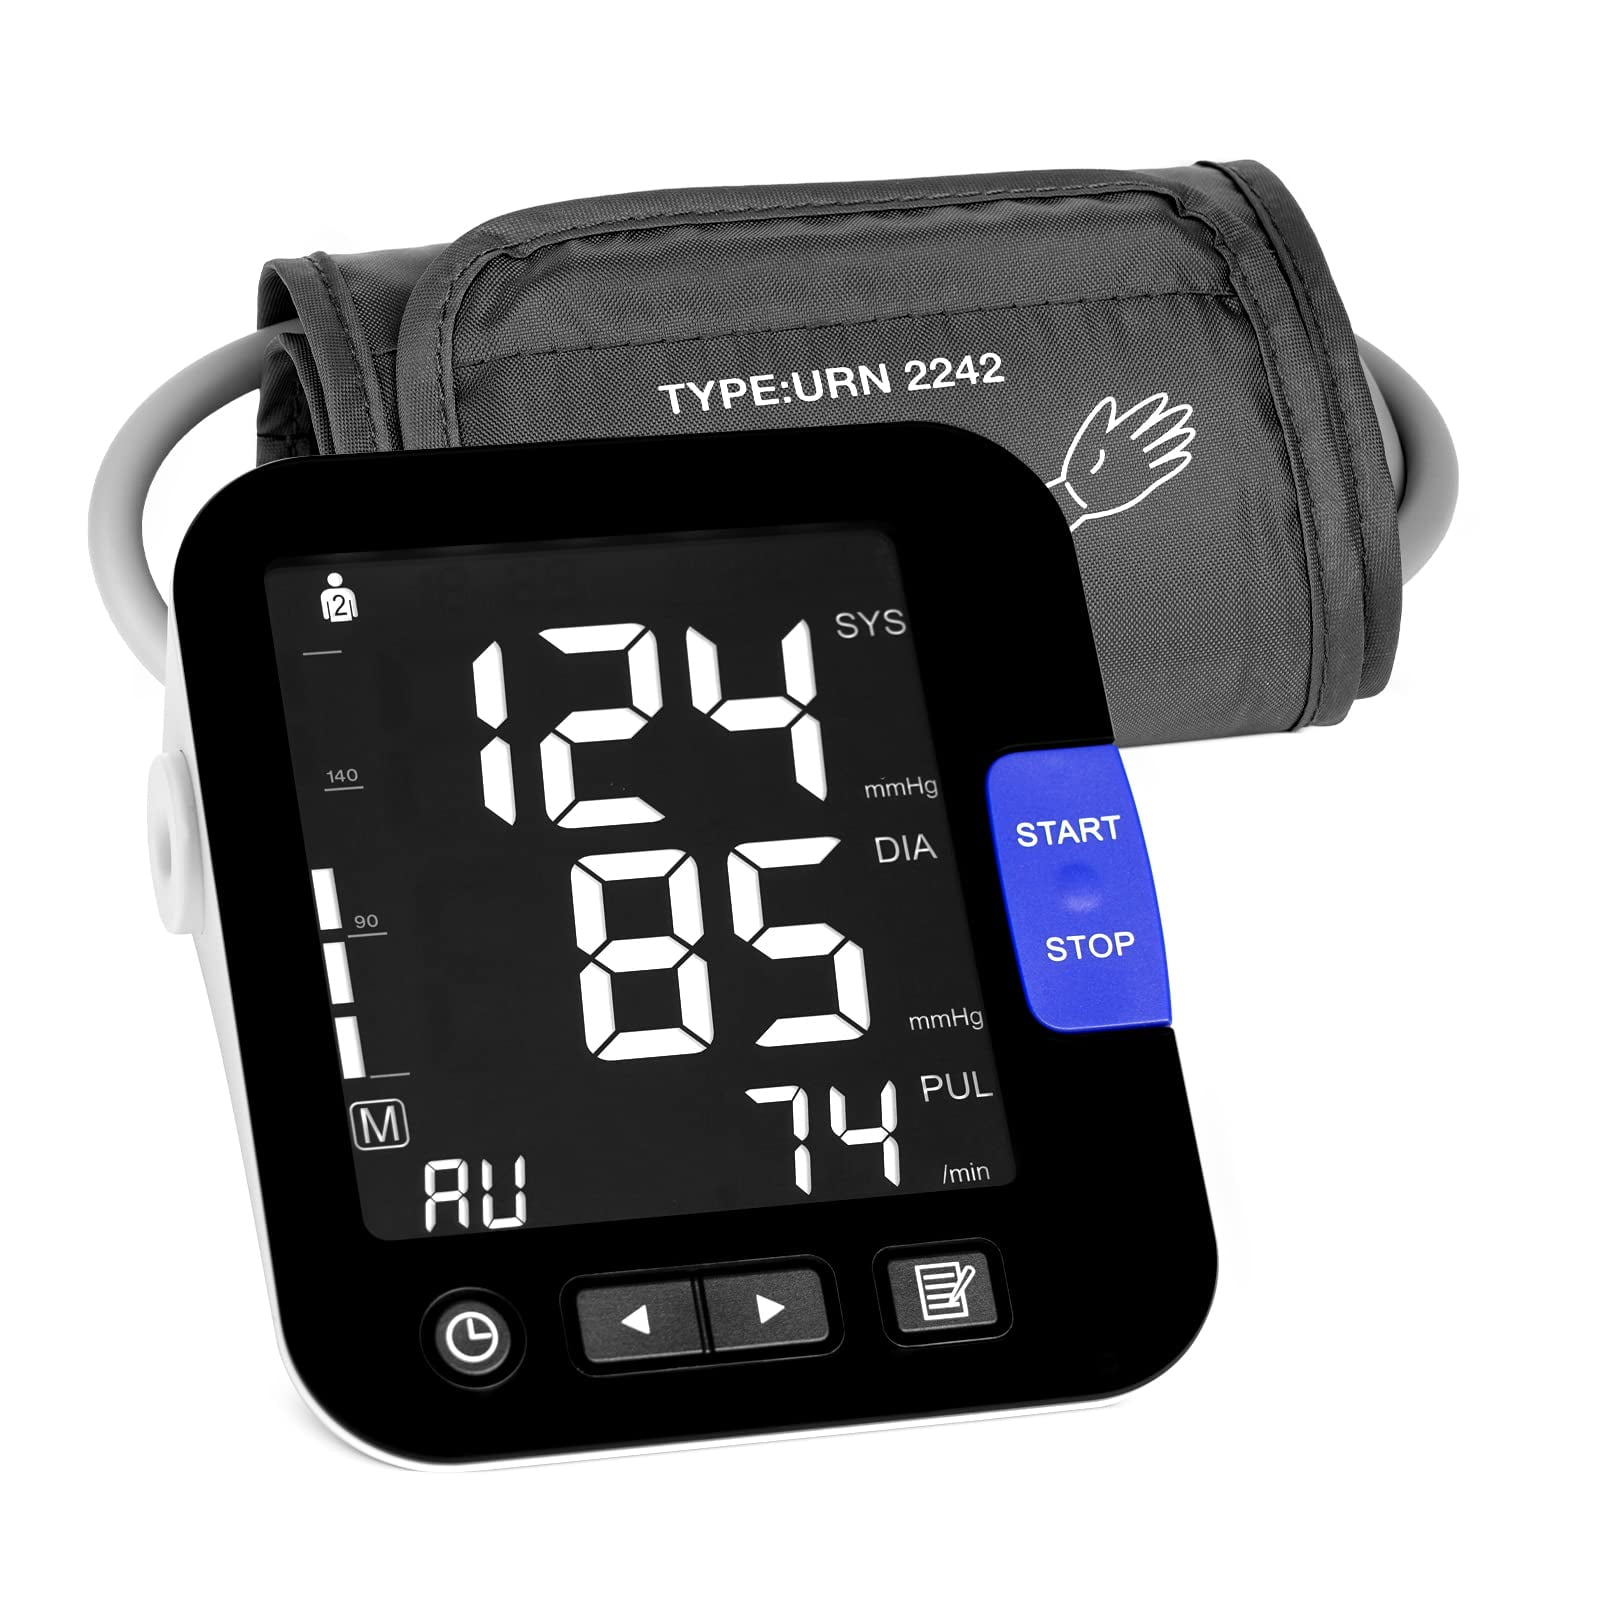  LIFEHOOD Digital Blood Pressure Monitor Upper Arm with 22~42cm  Cuff That Fits Standard to Large - Automatic Blood Pressure Cuff Stores Up  to 60 * 2 Readings (Black) : Health & Household